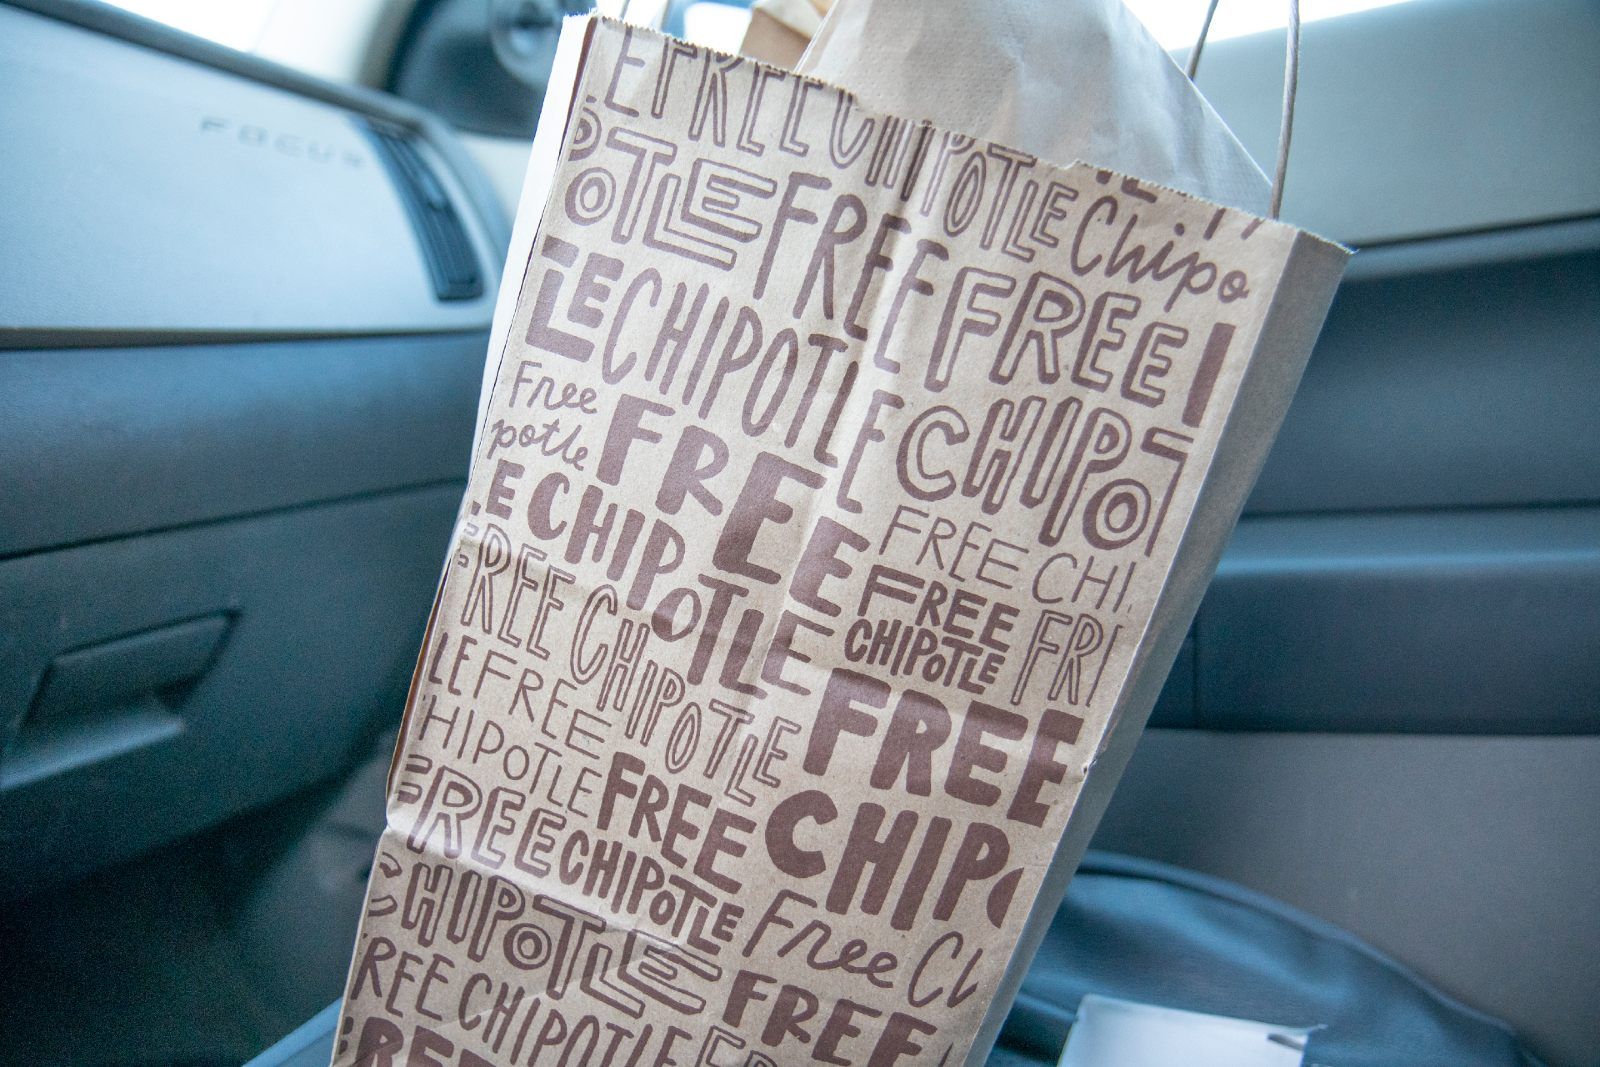 A Chipotle carryout bag sits on the passenger seat of a vehicle - delivery fees